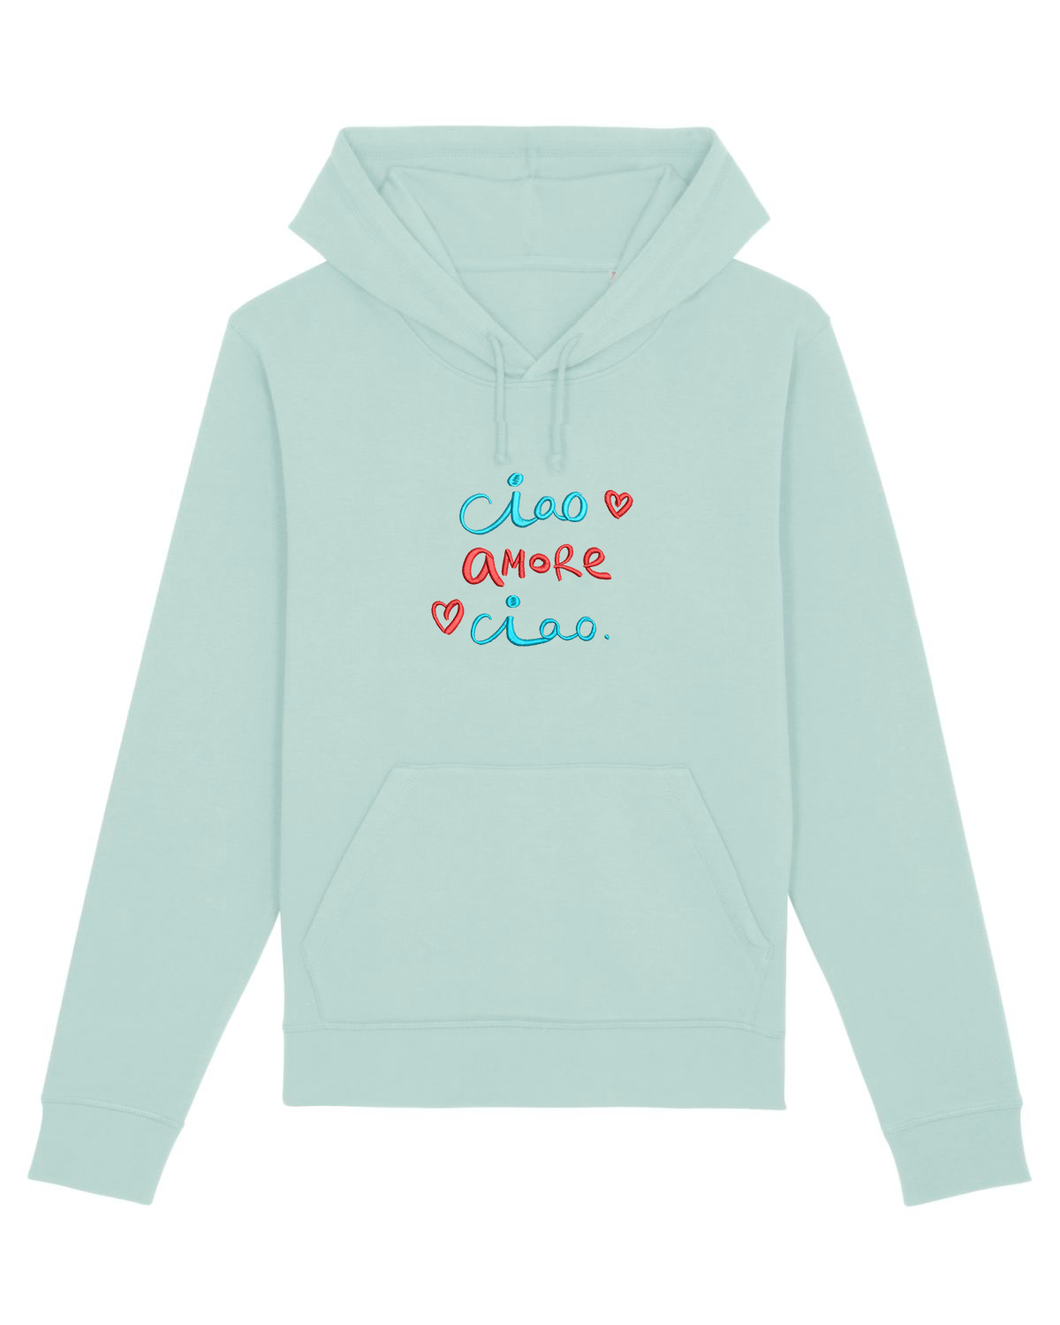 Ciao AMORE Ciao ❤️ - Embroidered - THE ESSENTIAL UNISEX HOODIE SWEATSHIRT